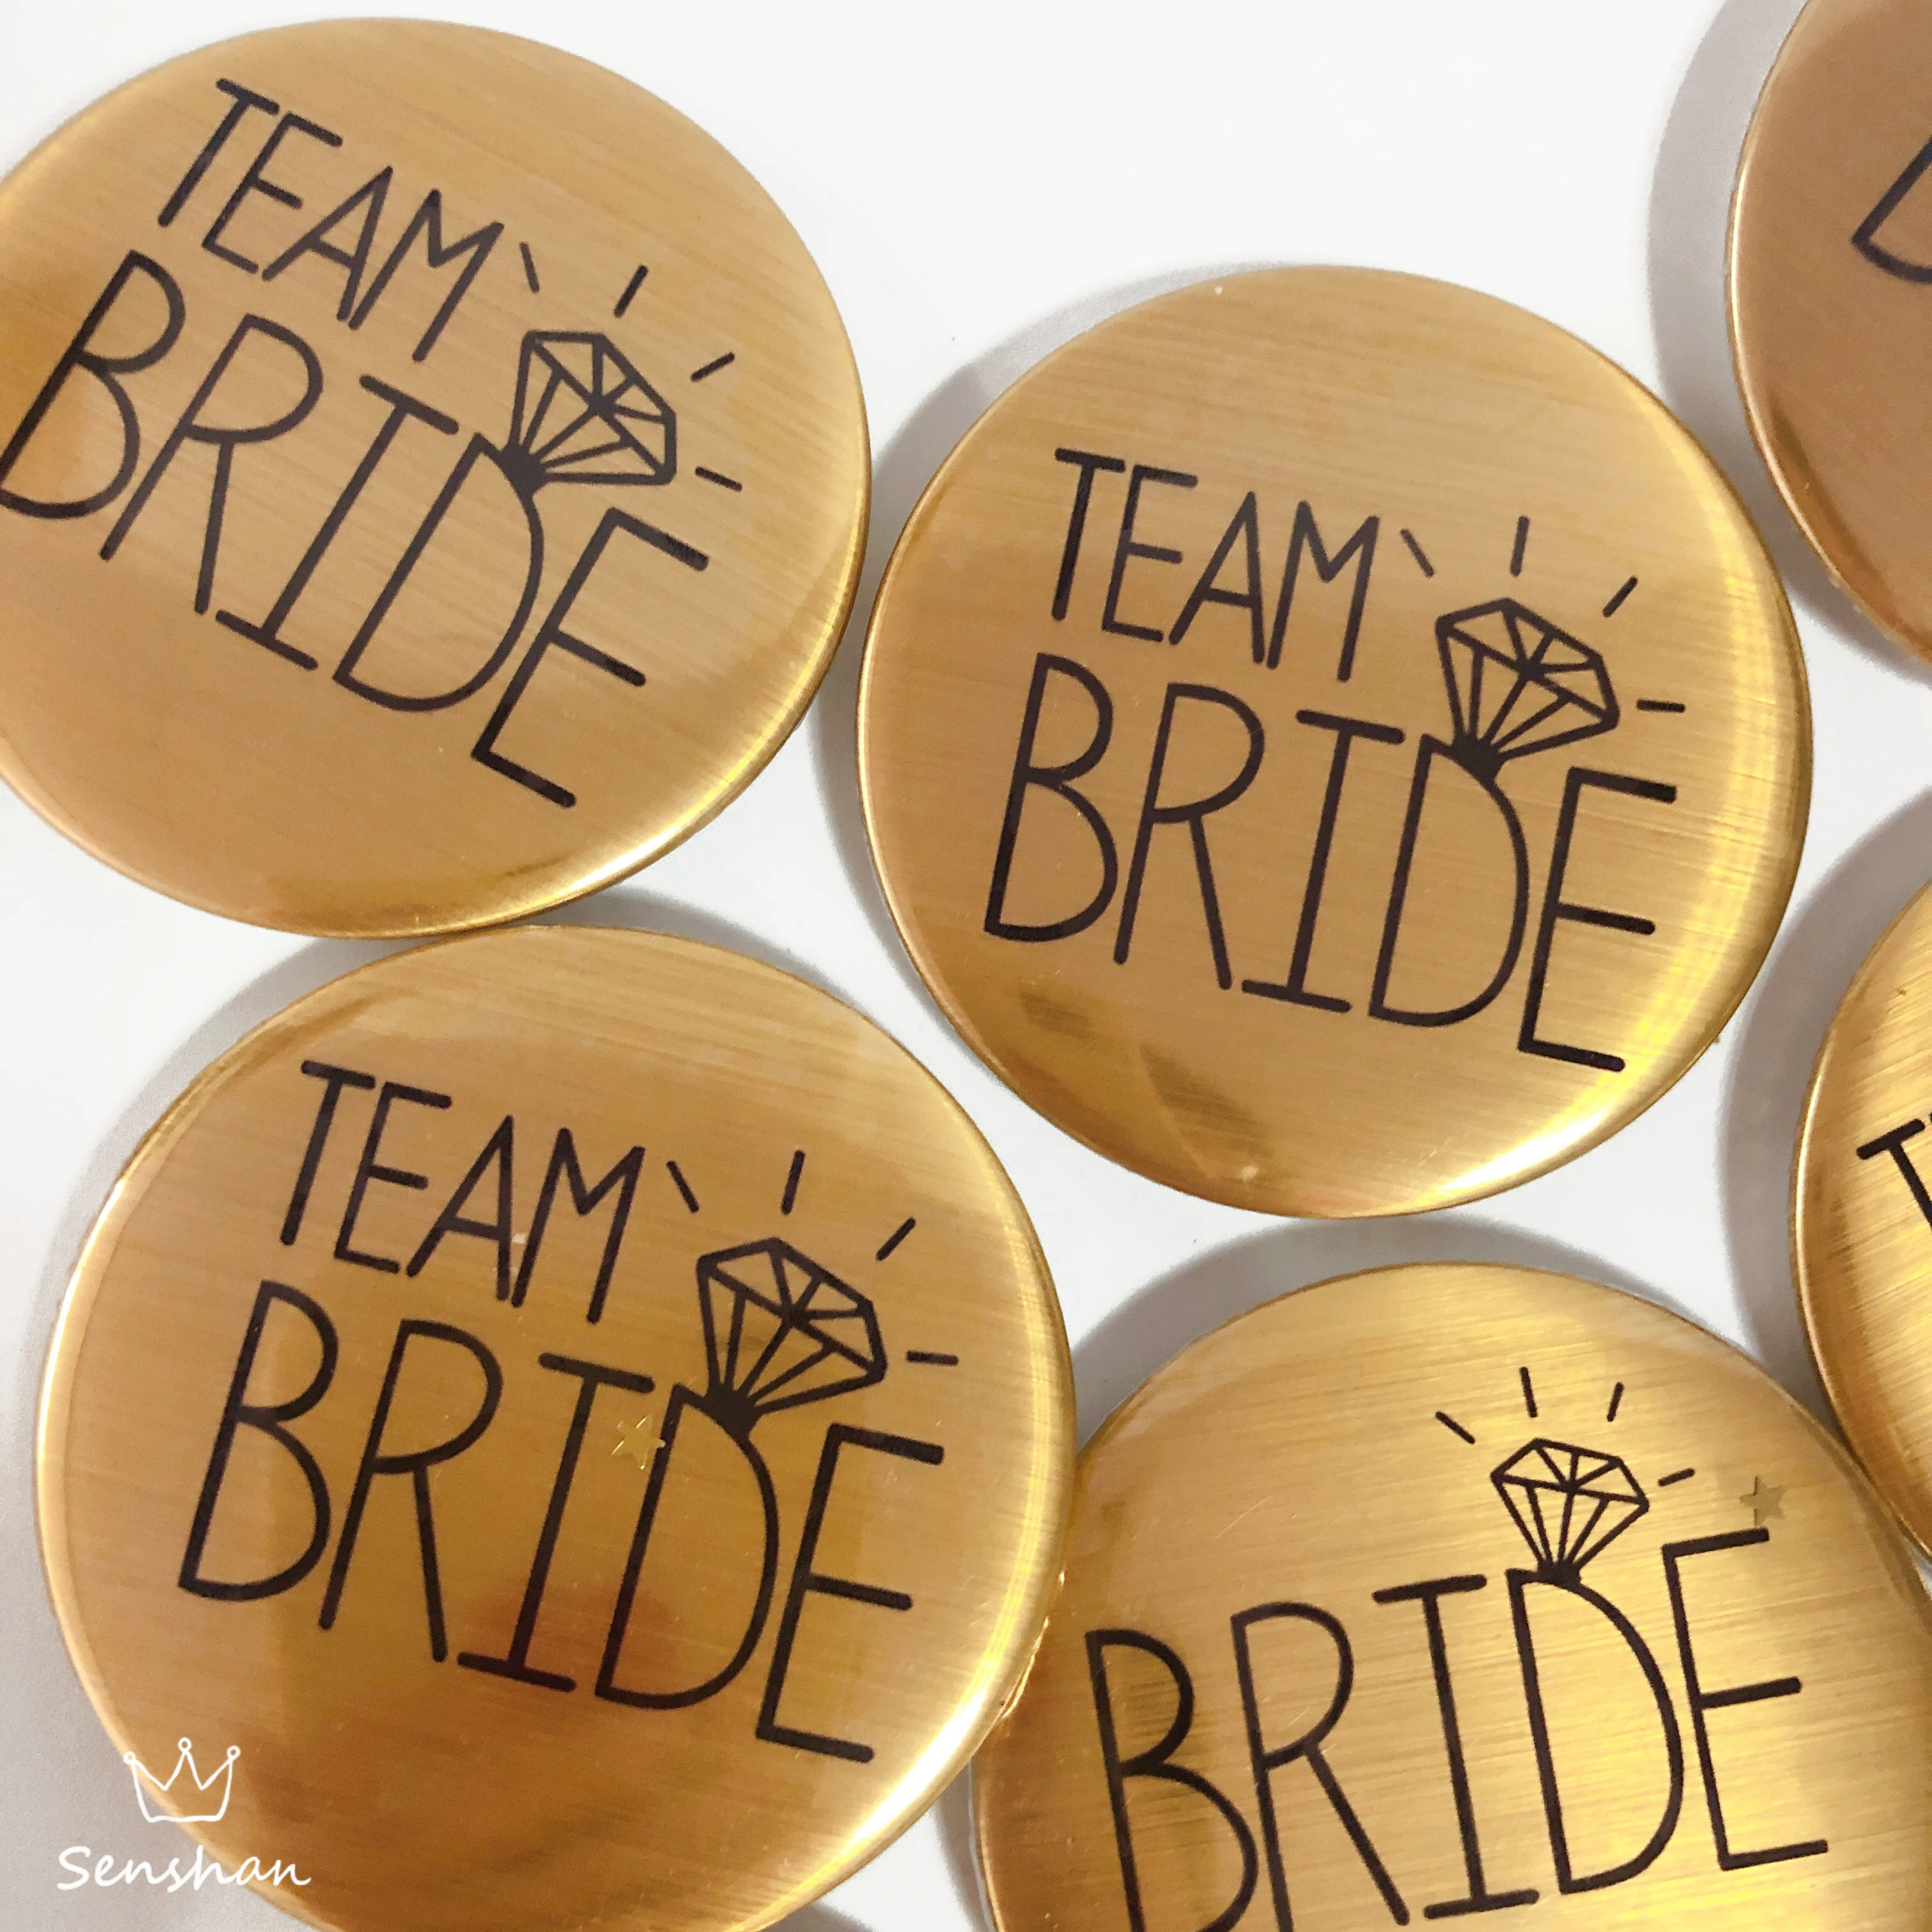 Family Wedding Buttons Pins Metal Bridal Shower Bride Groom Silver Party Favors 